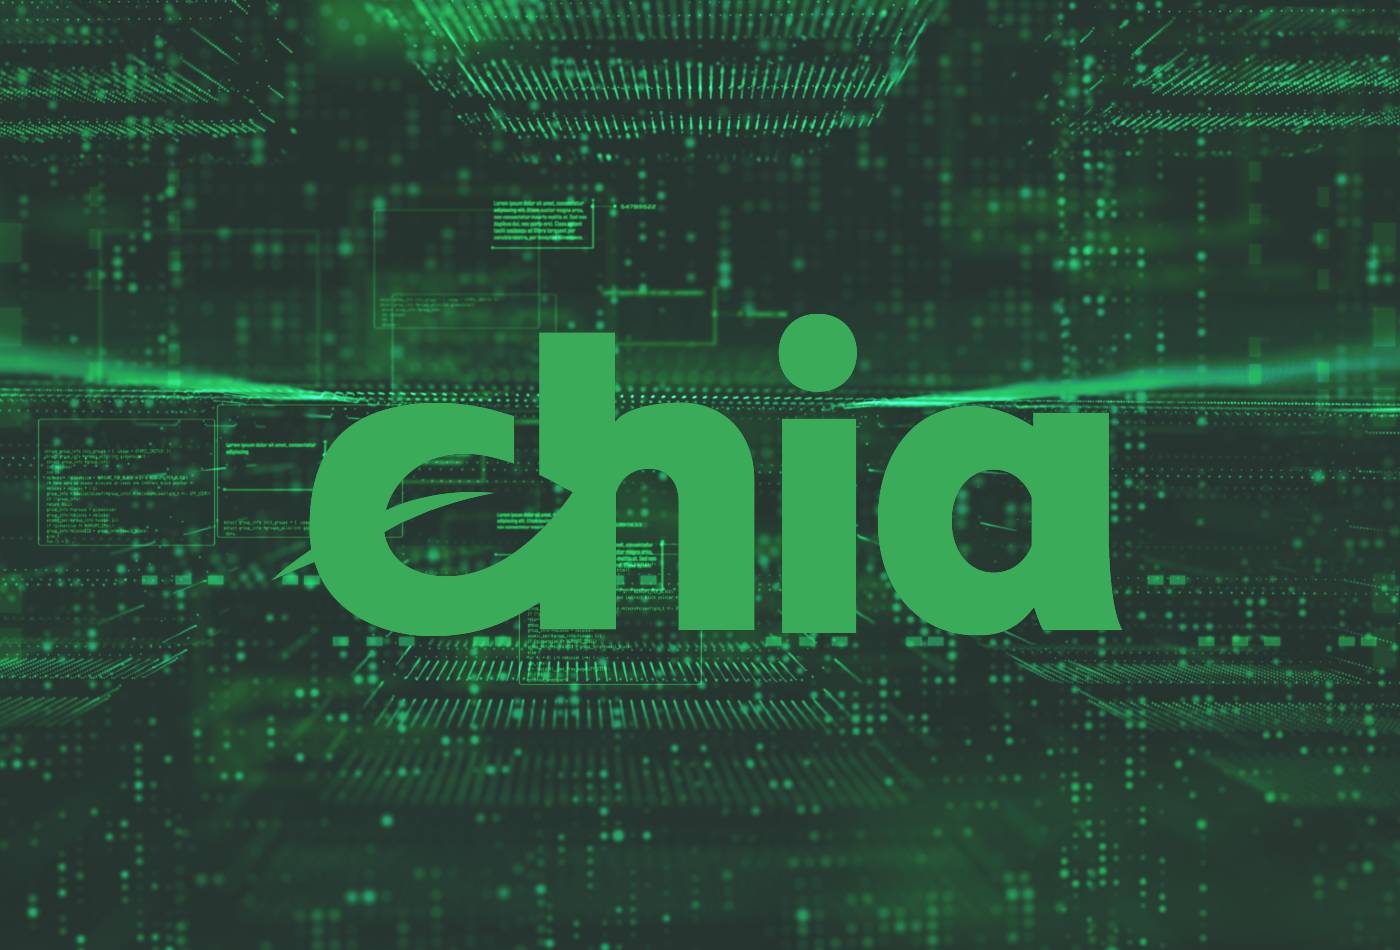 Chia (XCH) Price Prediction 2022-2030: The Best Time To Buy